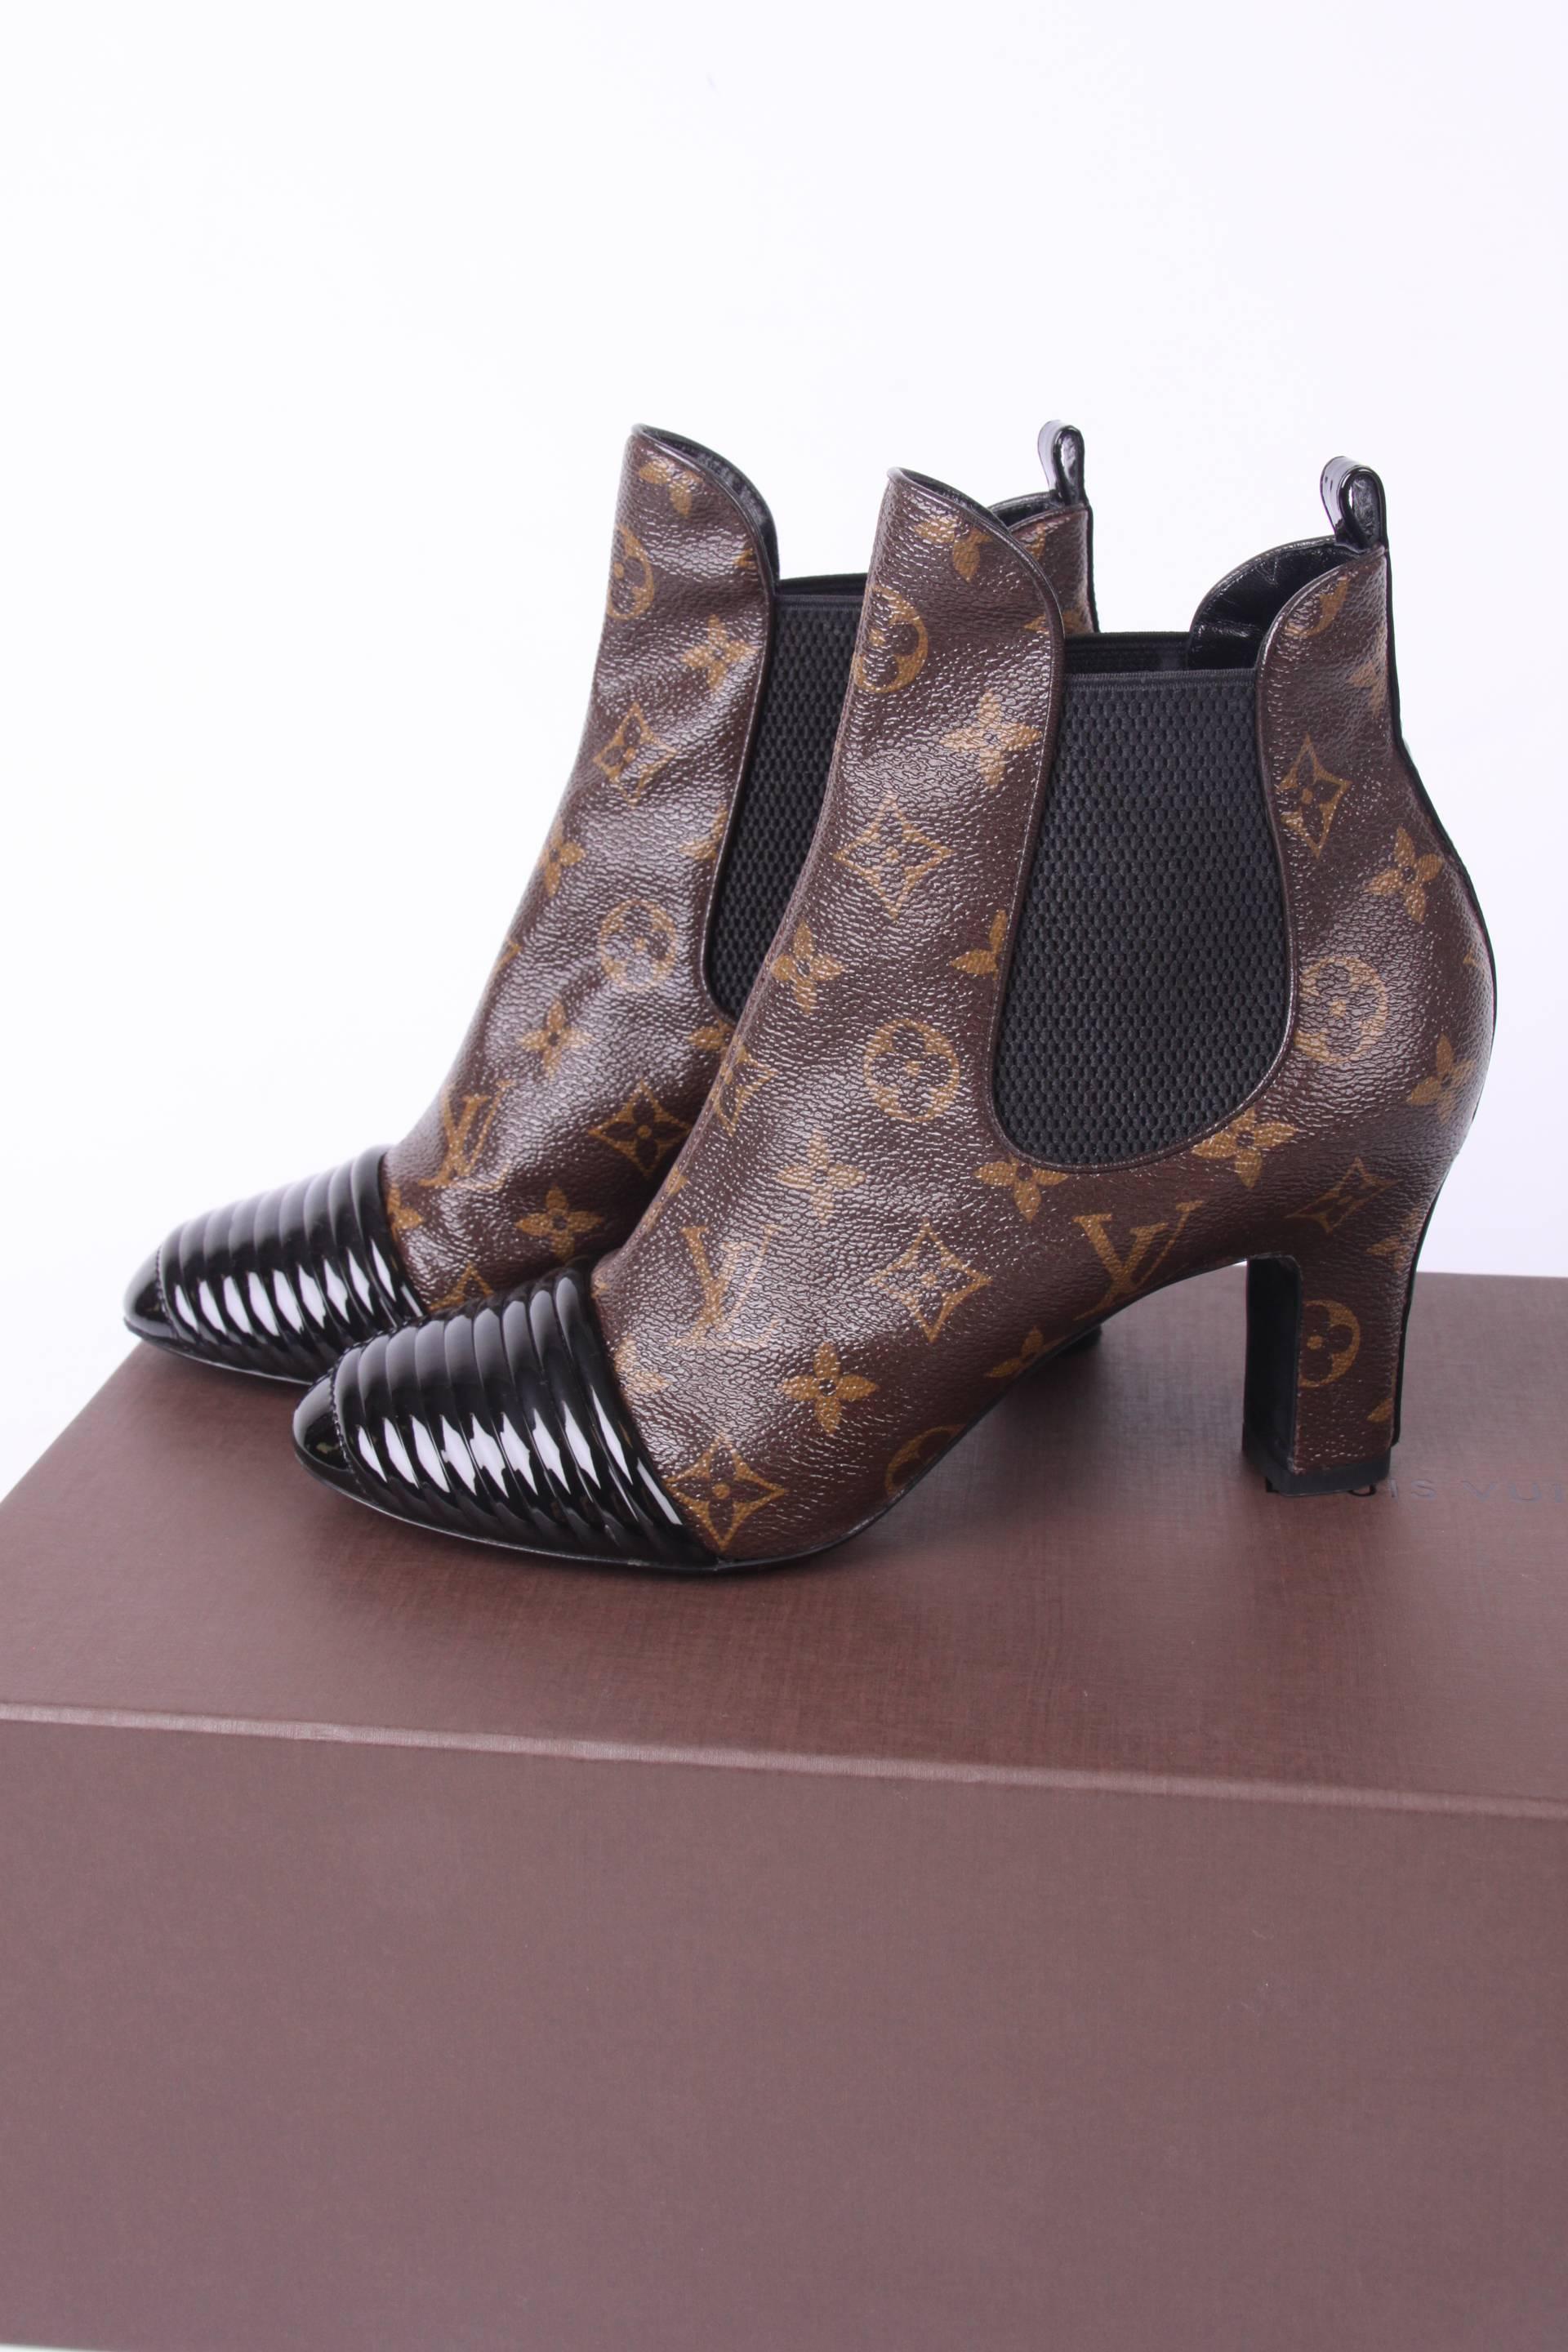 The classic Louis Vuitton Chelsea boot is relaunched under the name Revival. Neat!

This time executed in dark brown LV monogram canvas, some black patent leather is added to the to and the heel. Elastic side panels and an almond shaped toe. The